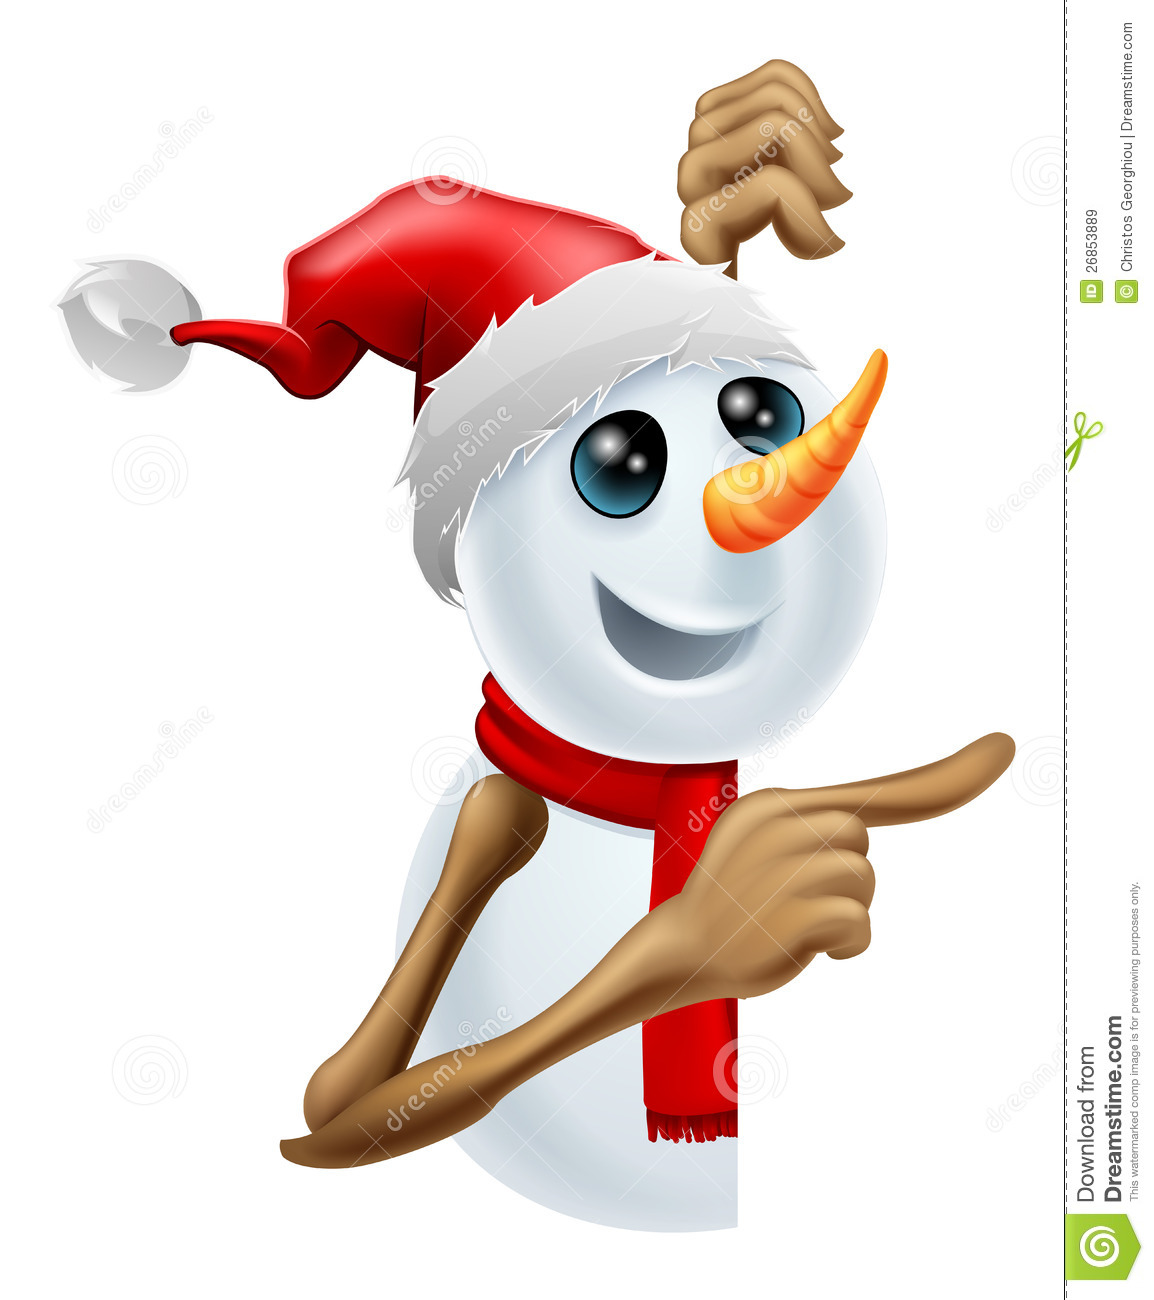 Happy Snowman In Santa Hat Pointing Royalty Free Stock Images   Image    